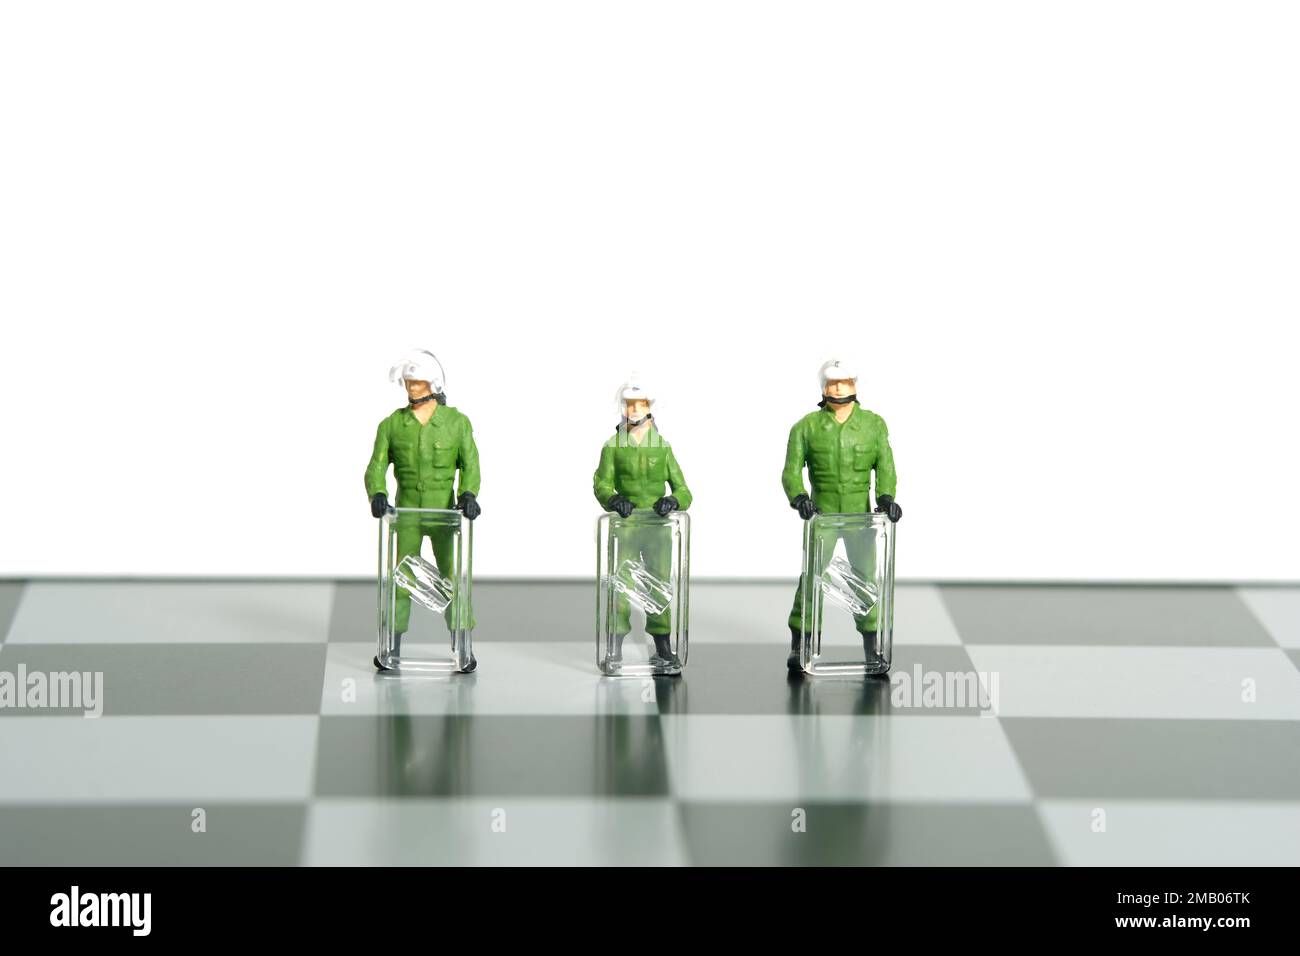 Miniature people toy figure photography. Protection strategy concept. A military anti riot armored army standing above chessboard. Isolated on white b Stock Photo